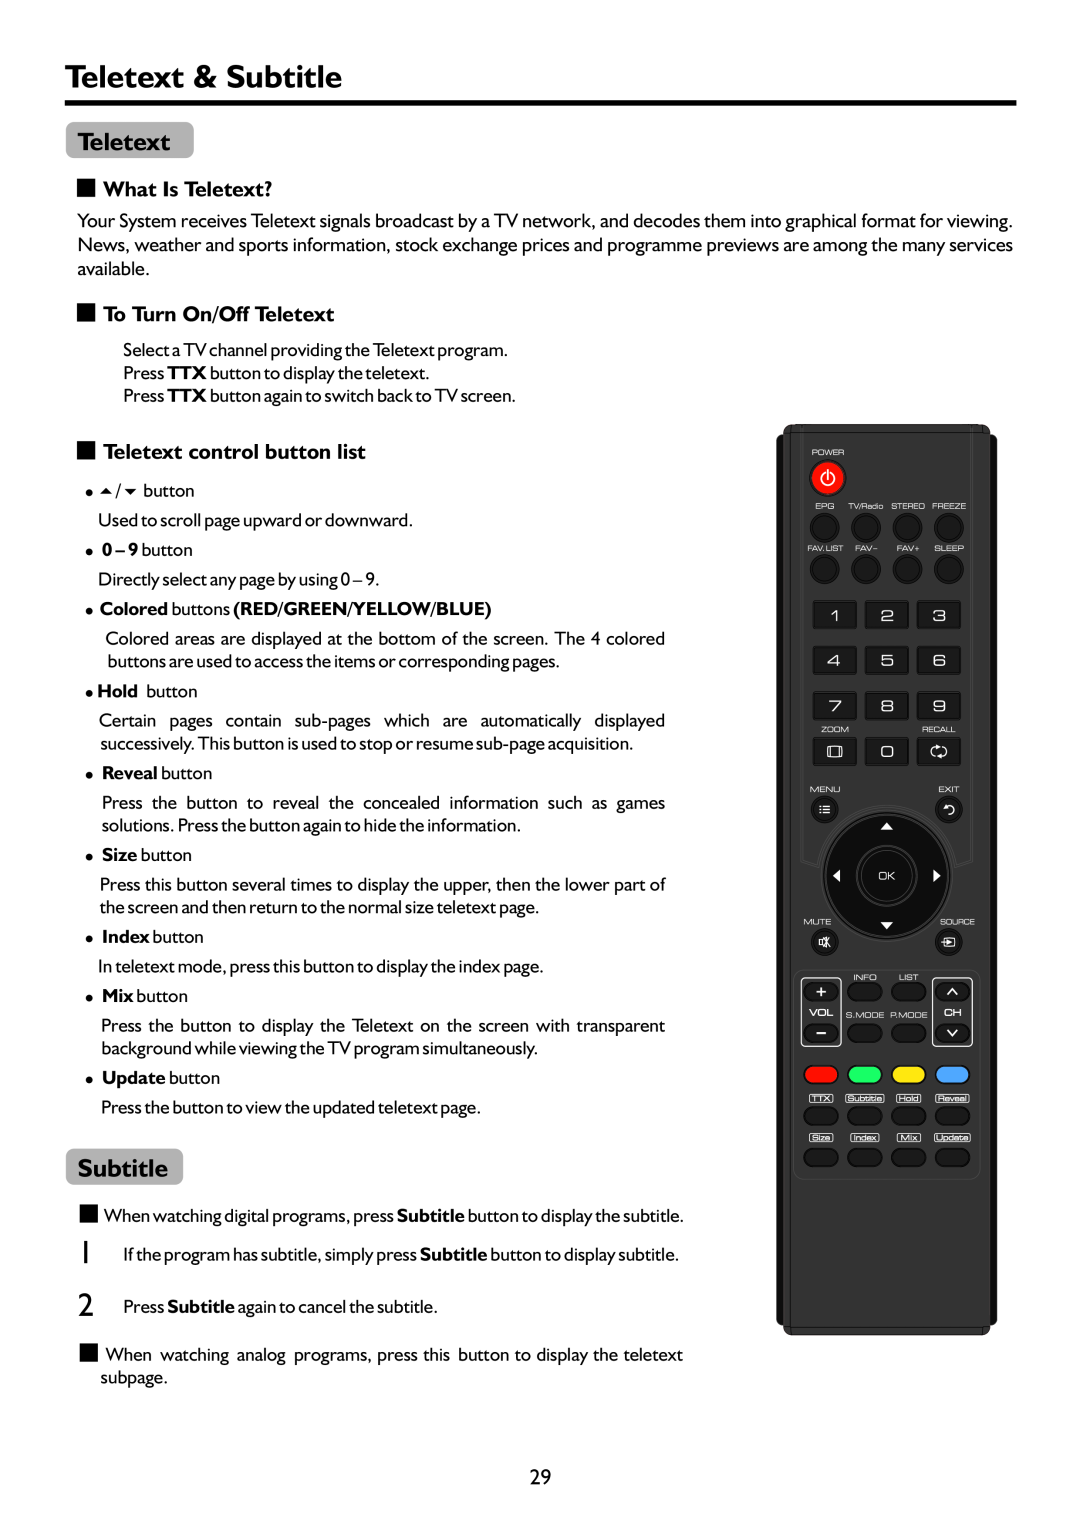 Palsonic TFTV818HD Teletext & Subtitle, What Is Teletext?, To Turn On/Off Teletext, Teletext control button list 